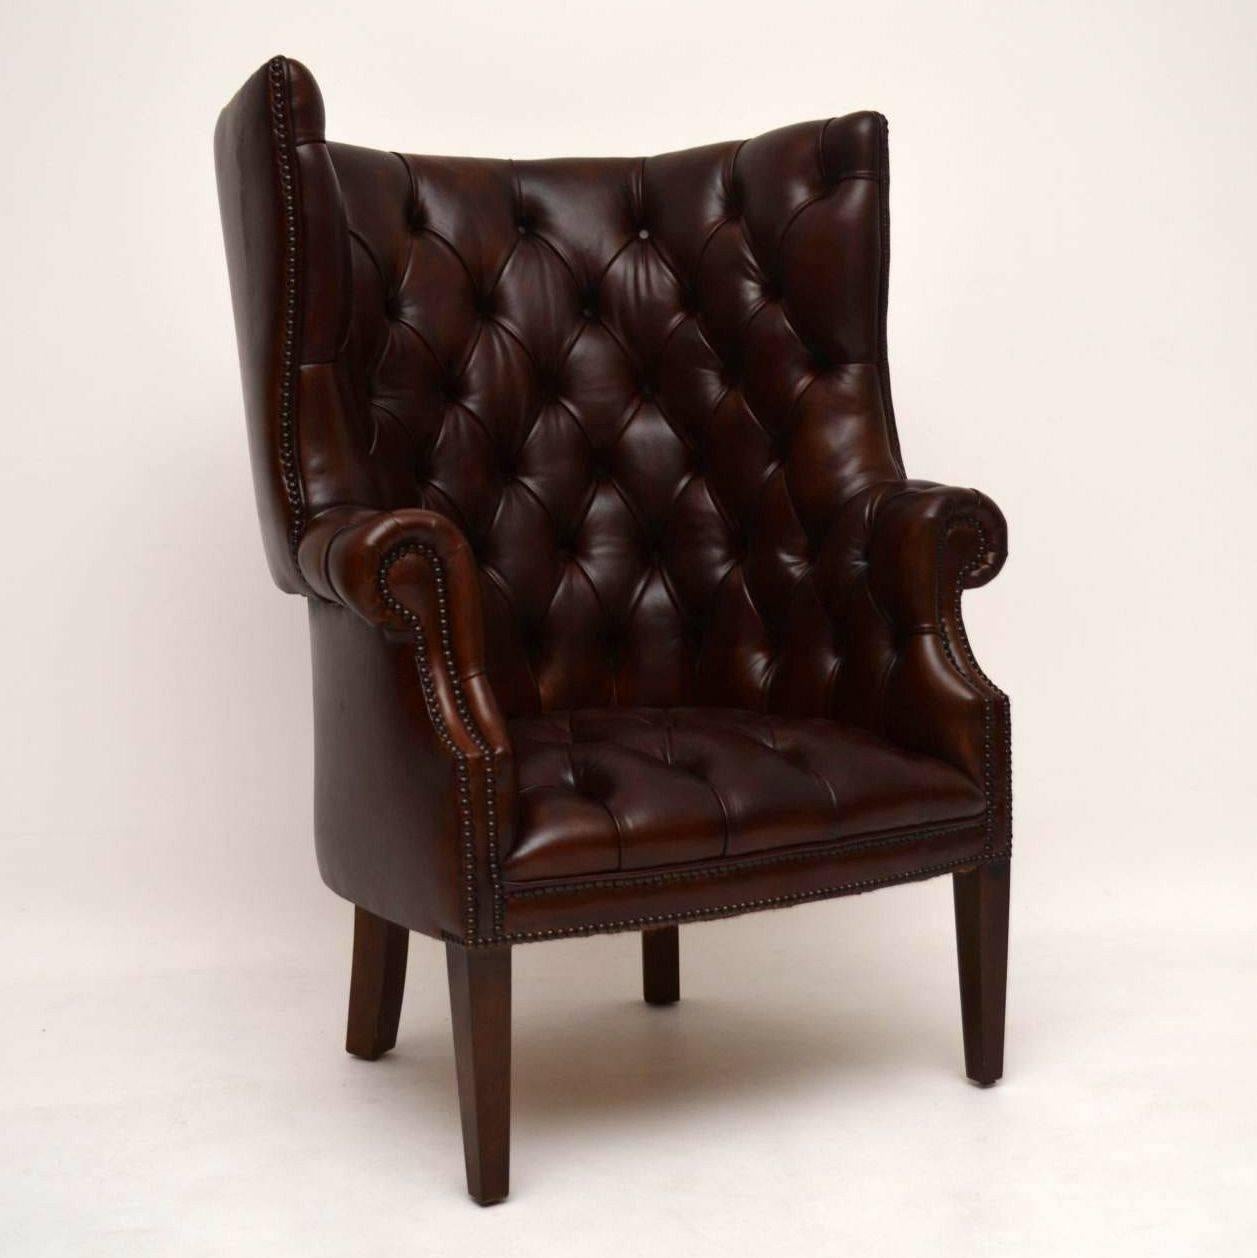 This pair of deep buttoned leather Porters armchairs have been made from new and this particular pair were an actual order from a regular client of mine. They saw an antique single leather Porters armchair and asked if we could make a pair that were